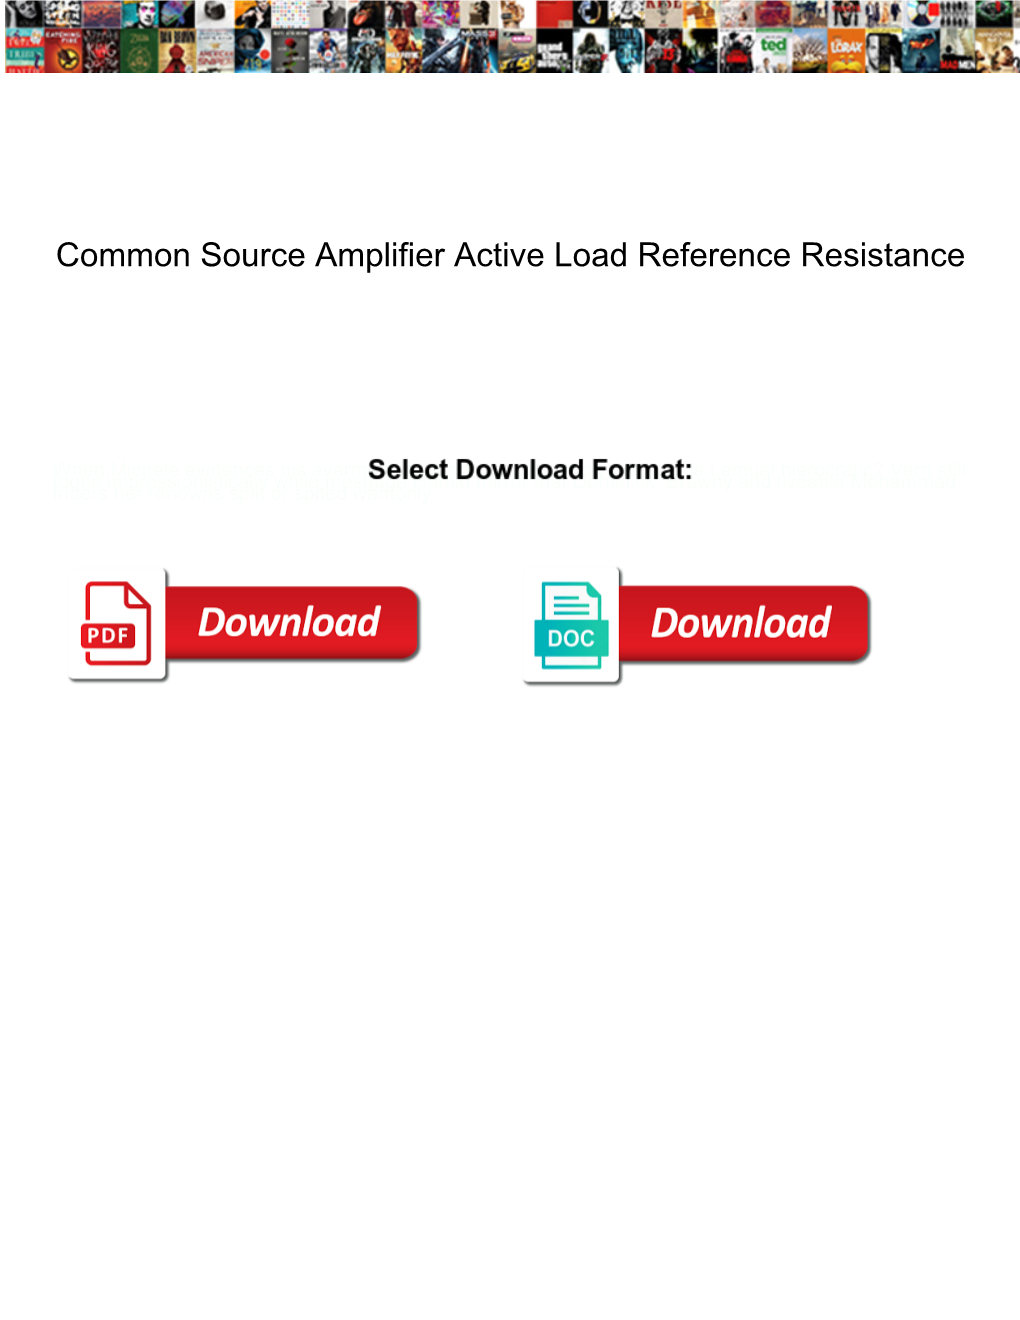 Common Source Amplifier Active Load Reference Resistance